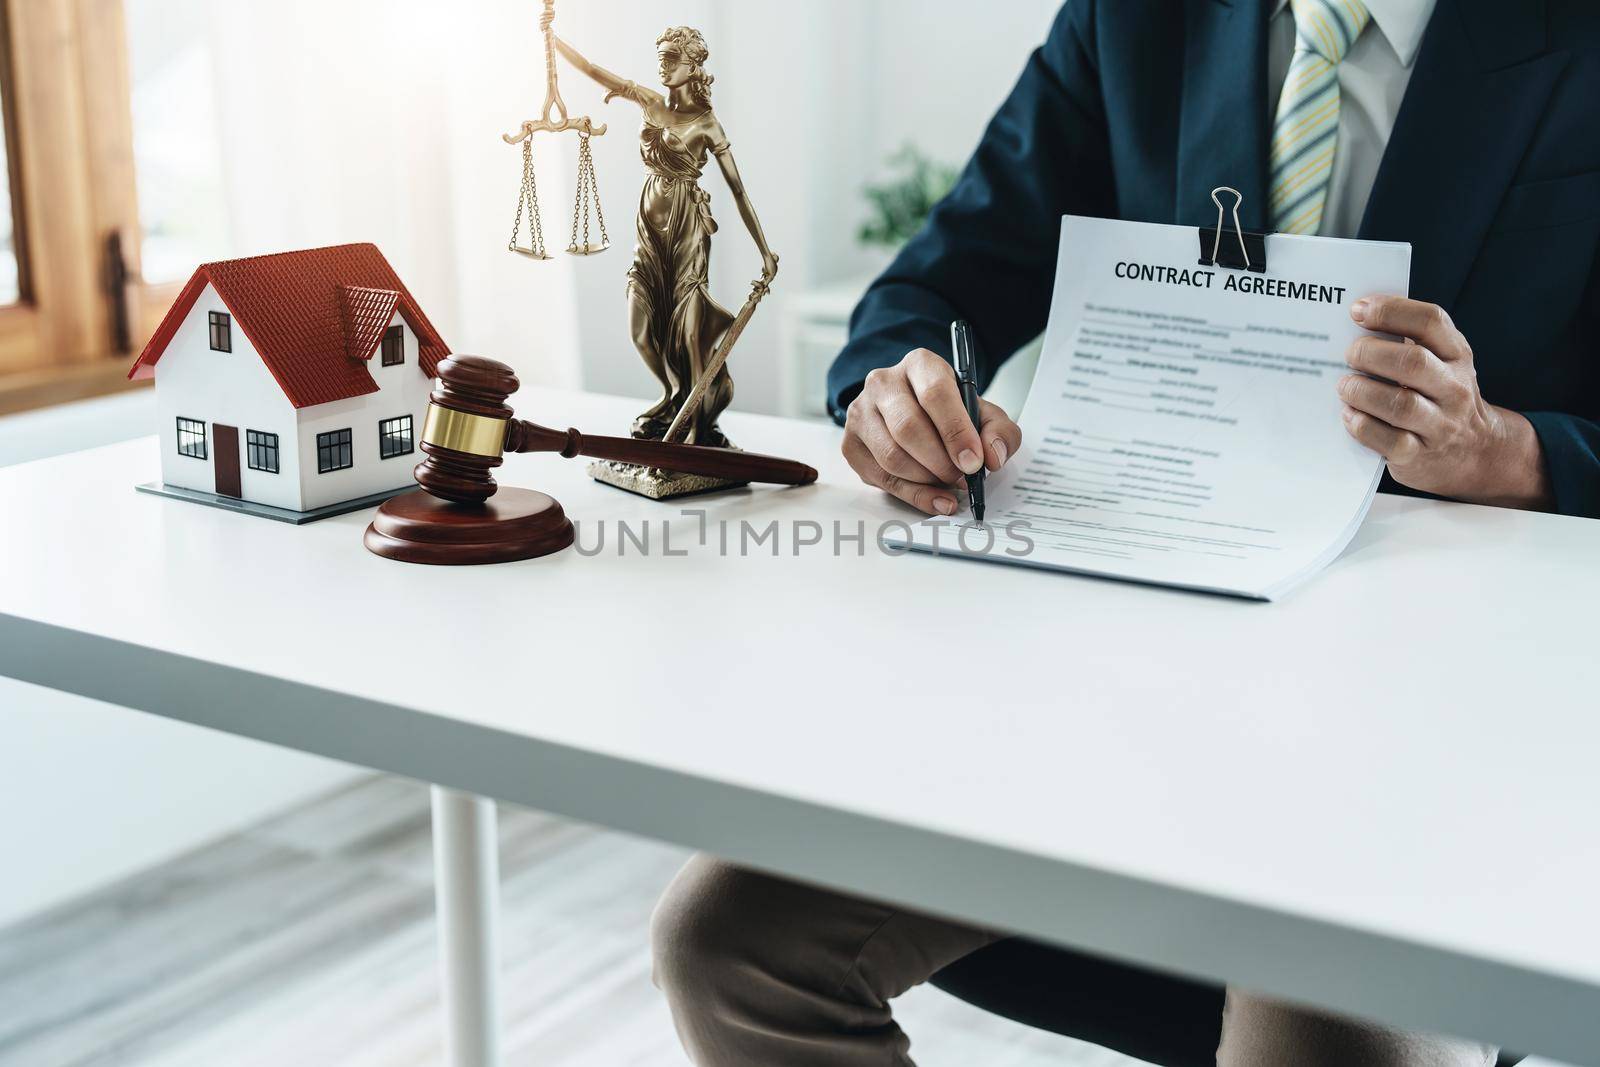 Law, Consultation, Agreement, Contract, Concept Attorney or lawyer holding pen pointing document is sitting on the chair with a client's complaint to determine the house and land in court.